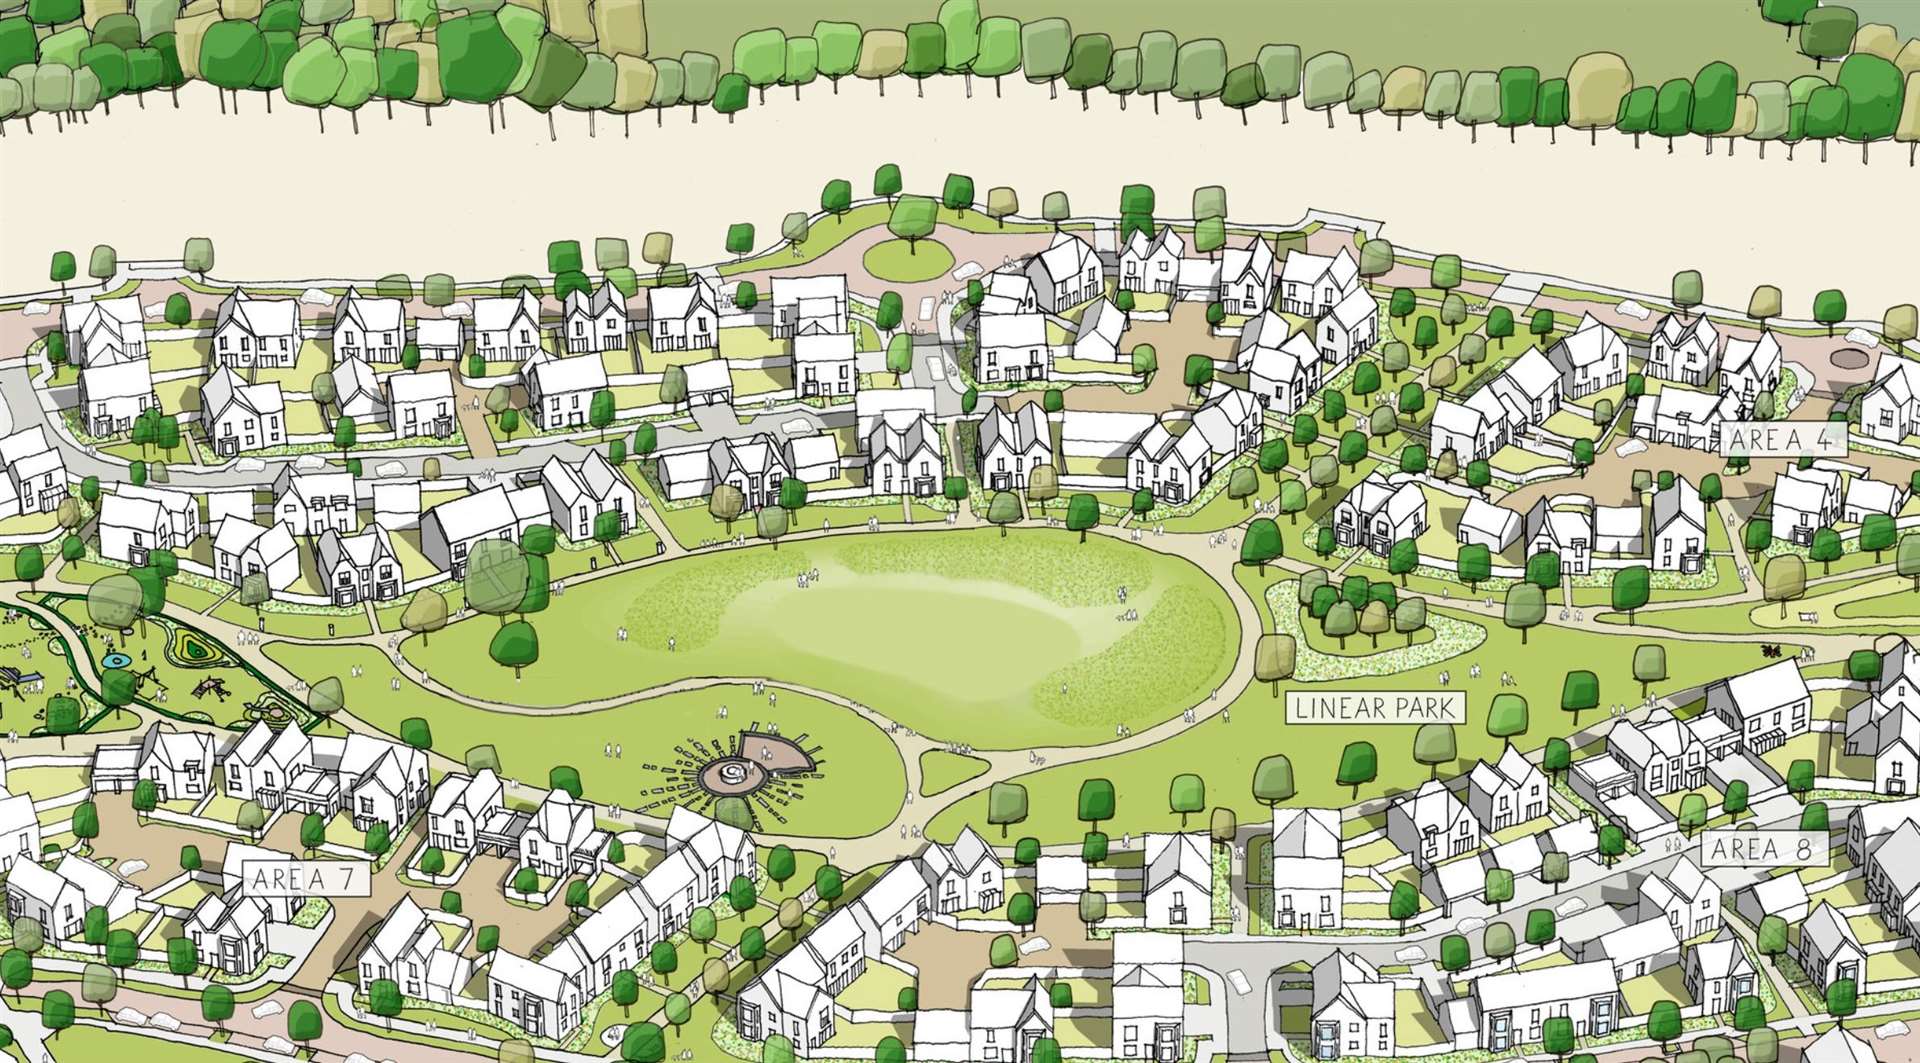 The site in Shottendane Road, Margate, could see up to 260 homes built on its 35-acre site